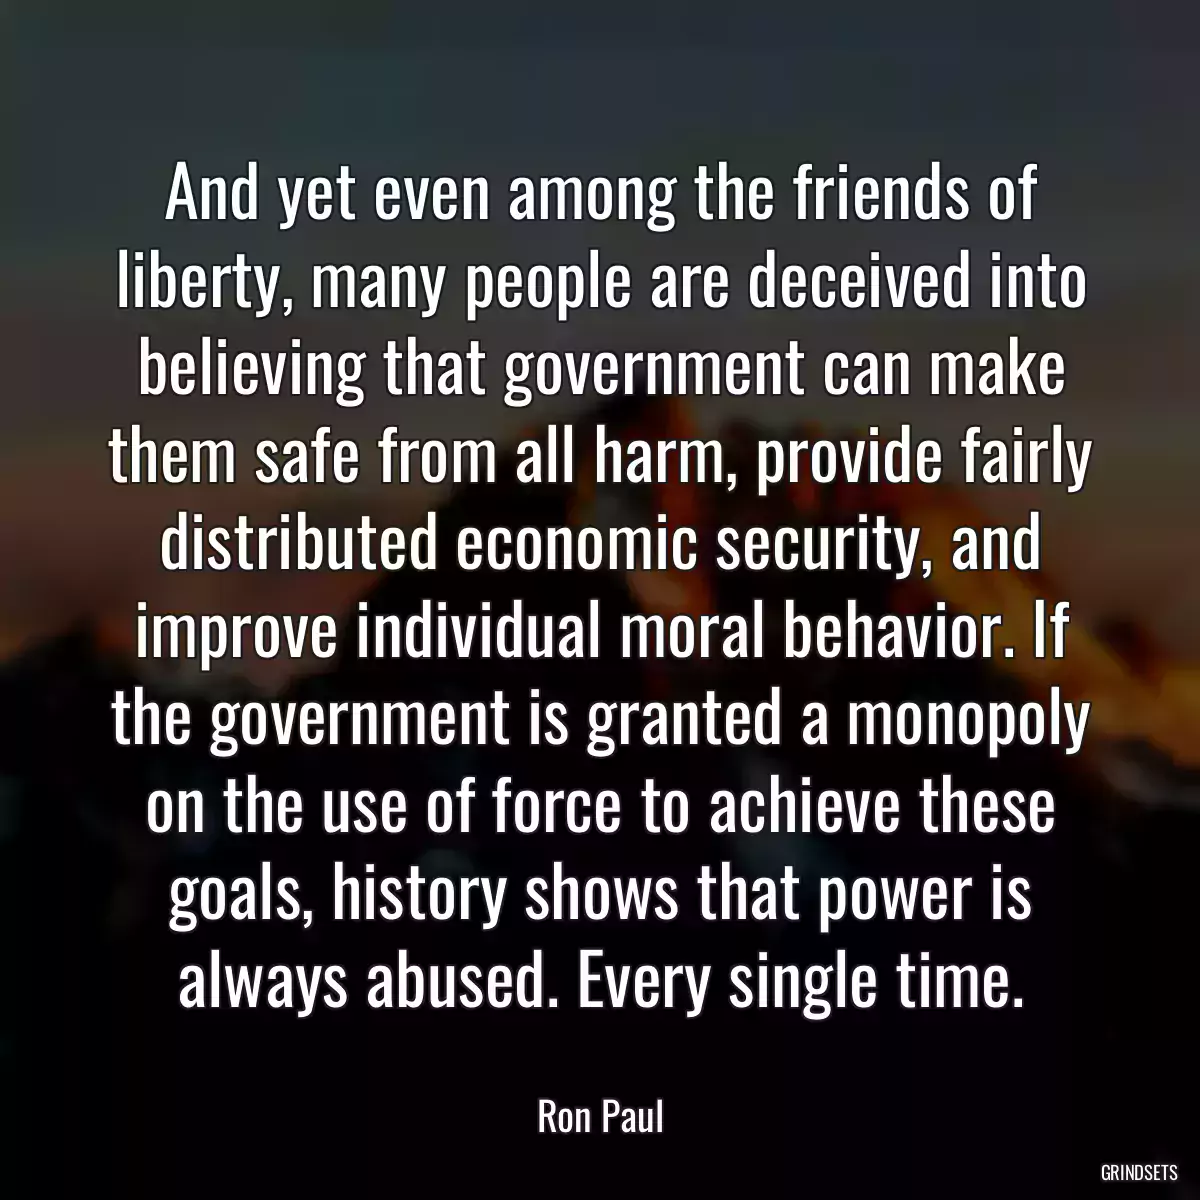 And yet even among the friends of liberty, many people are deceived into believing that government can make them safe from all harm, provide fairly distributed economic security, and improve individual moral behavior. If the government is granted a monopoly on the use of force to achieve these goals, history shows that power is always abused. Every single time.